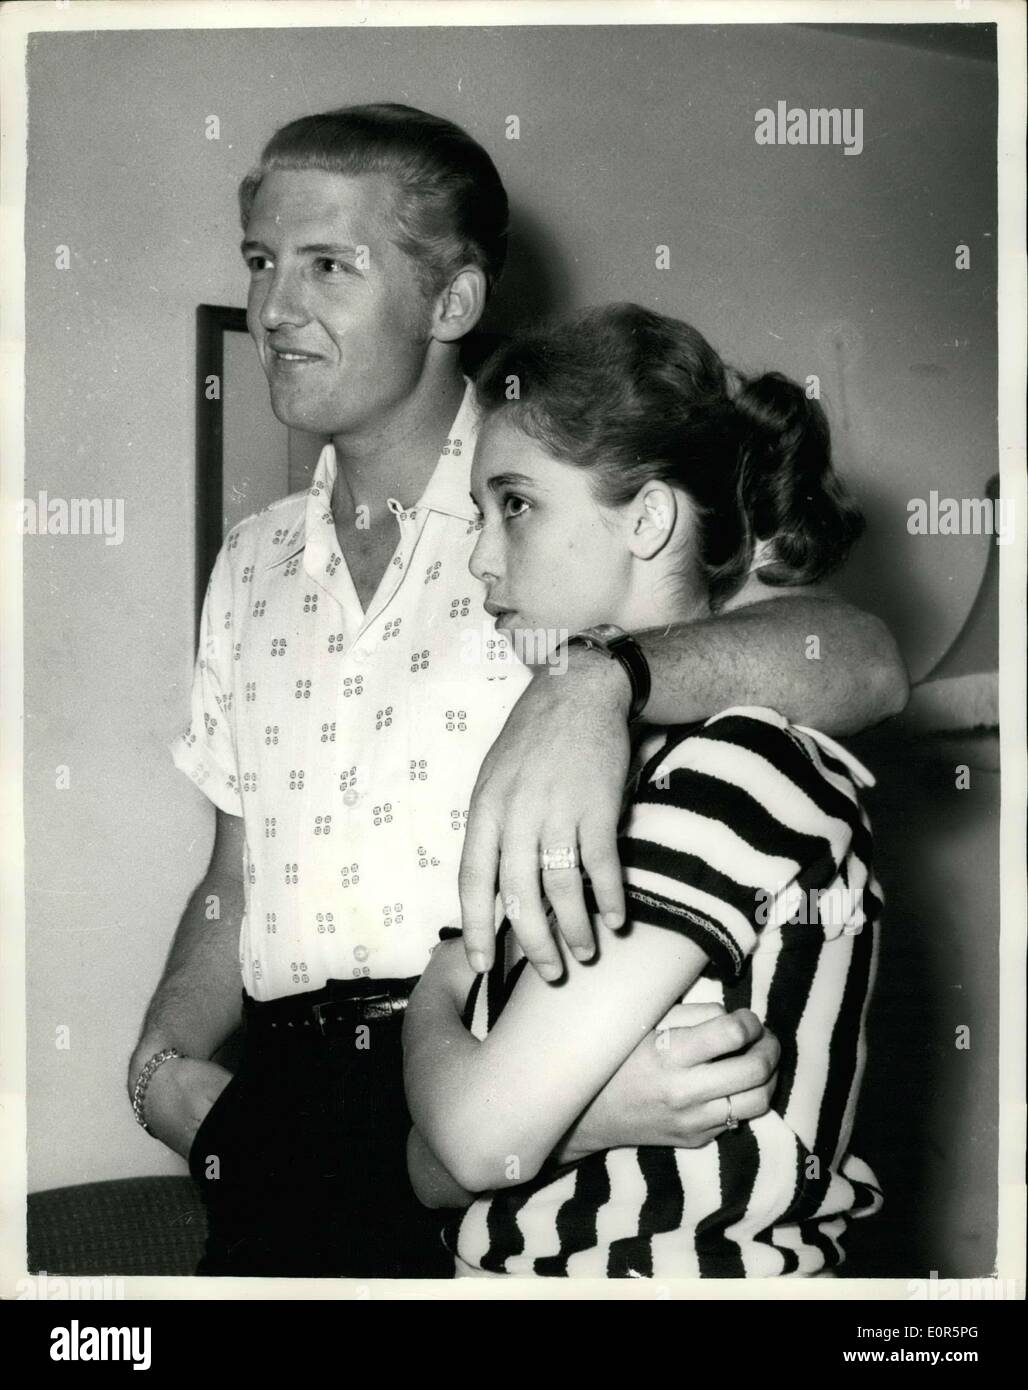 May 23, 1958 - 22 - year - old American rock n' roll singer arrives here with his 15 - year old wife: Jerry Lee Lewis, the American rock n' roll singer, flew into London yesterday with a shock for his fans. For the girl who arrived with him turned out to be his 15 - year - old wife of two months. Her name was Myra, and she is his third wife. Jerry was first married at 15 and again at 17, but this time he says he has found the right girl Stock Photo